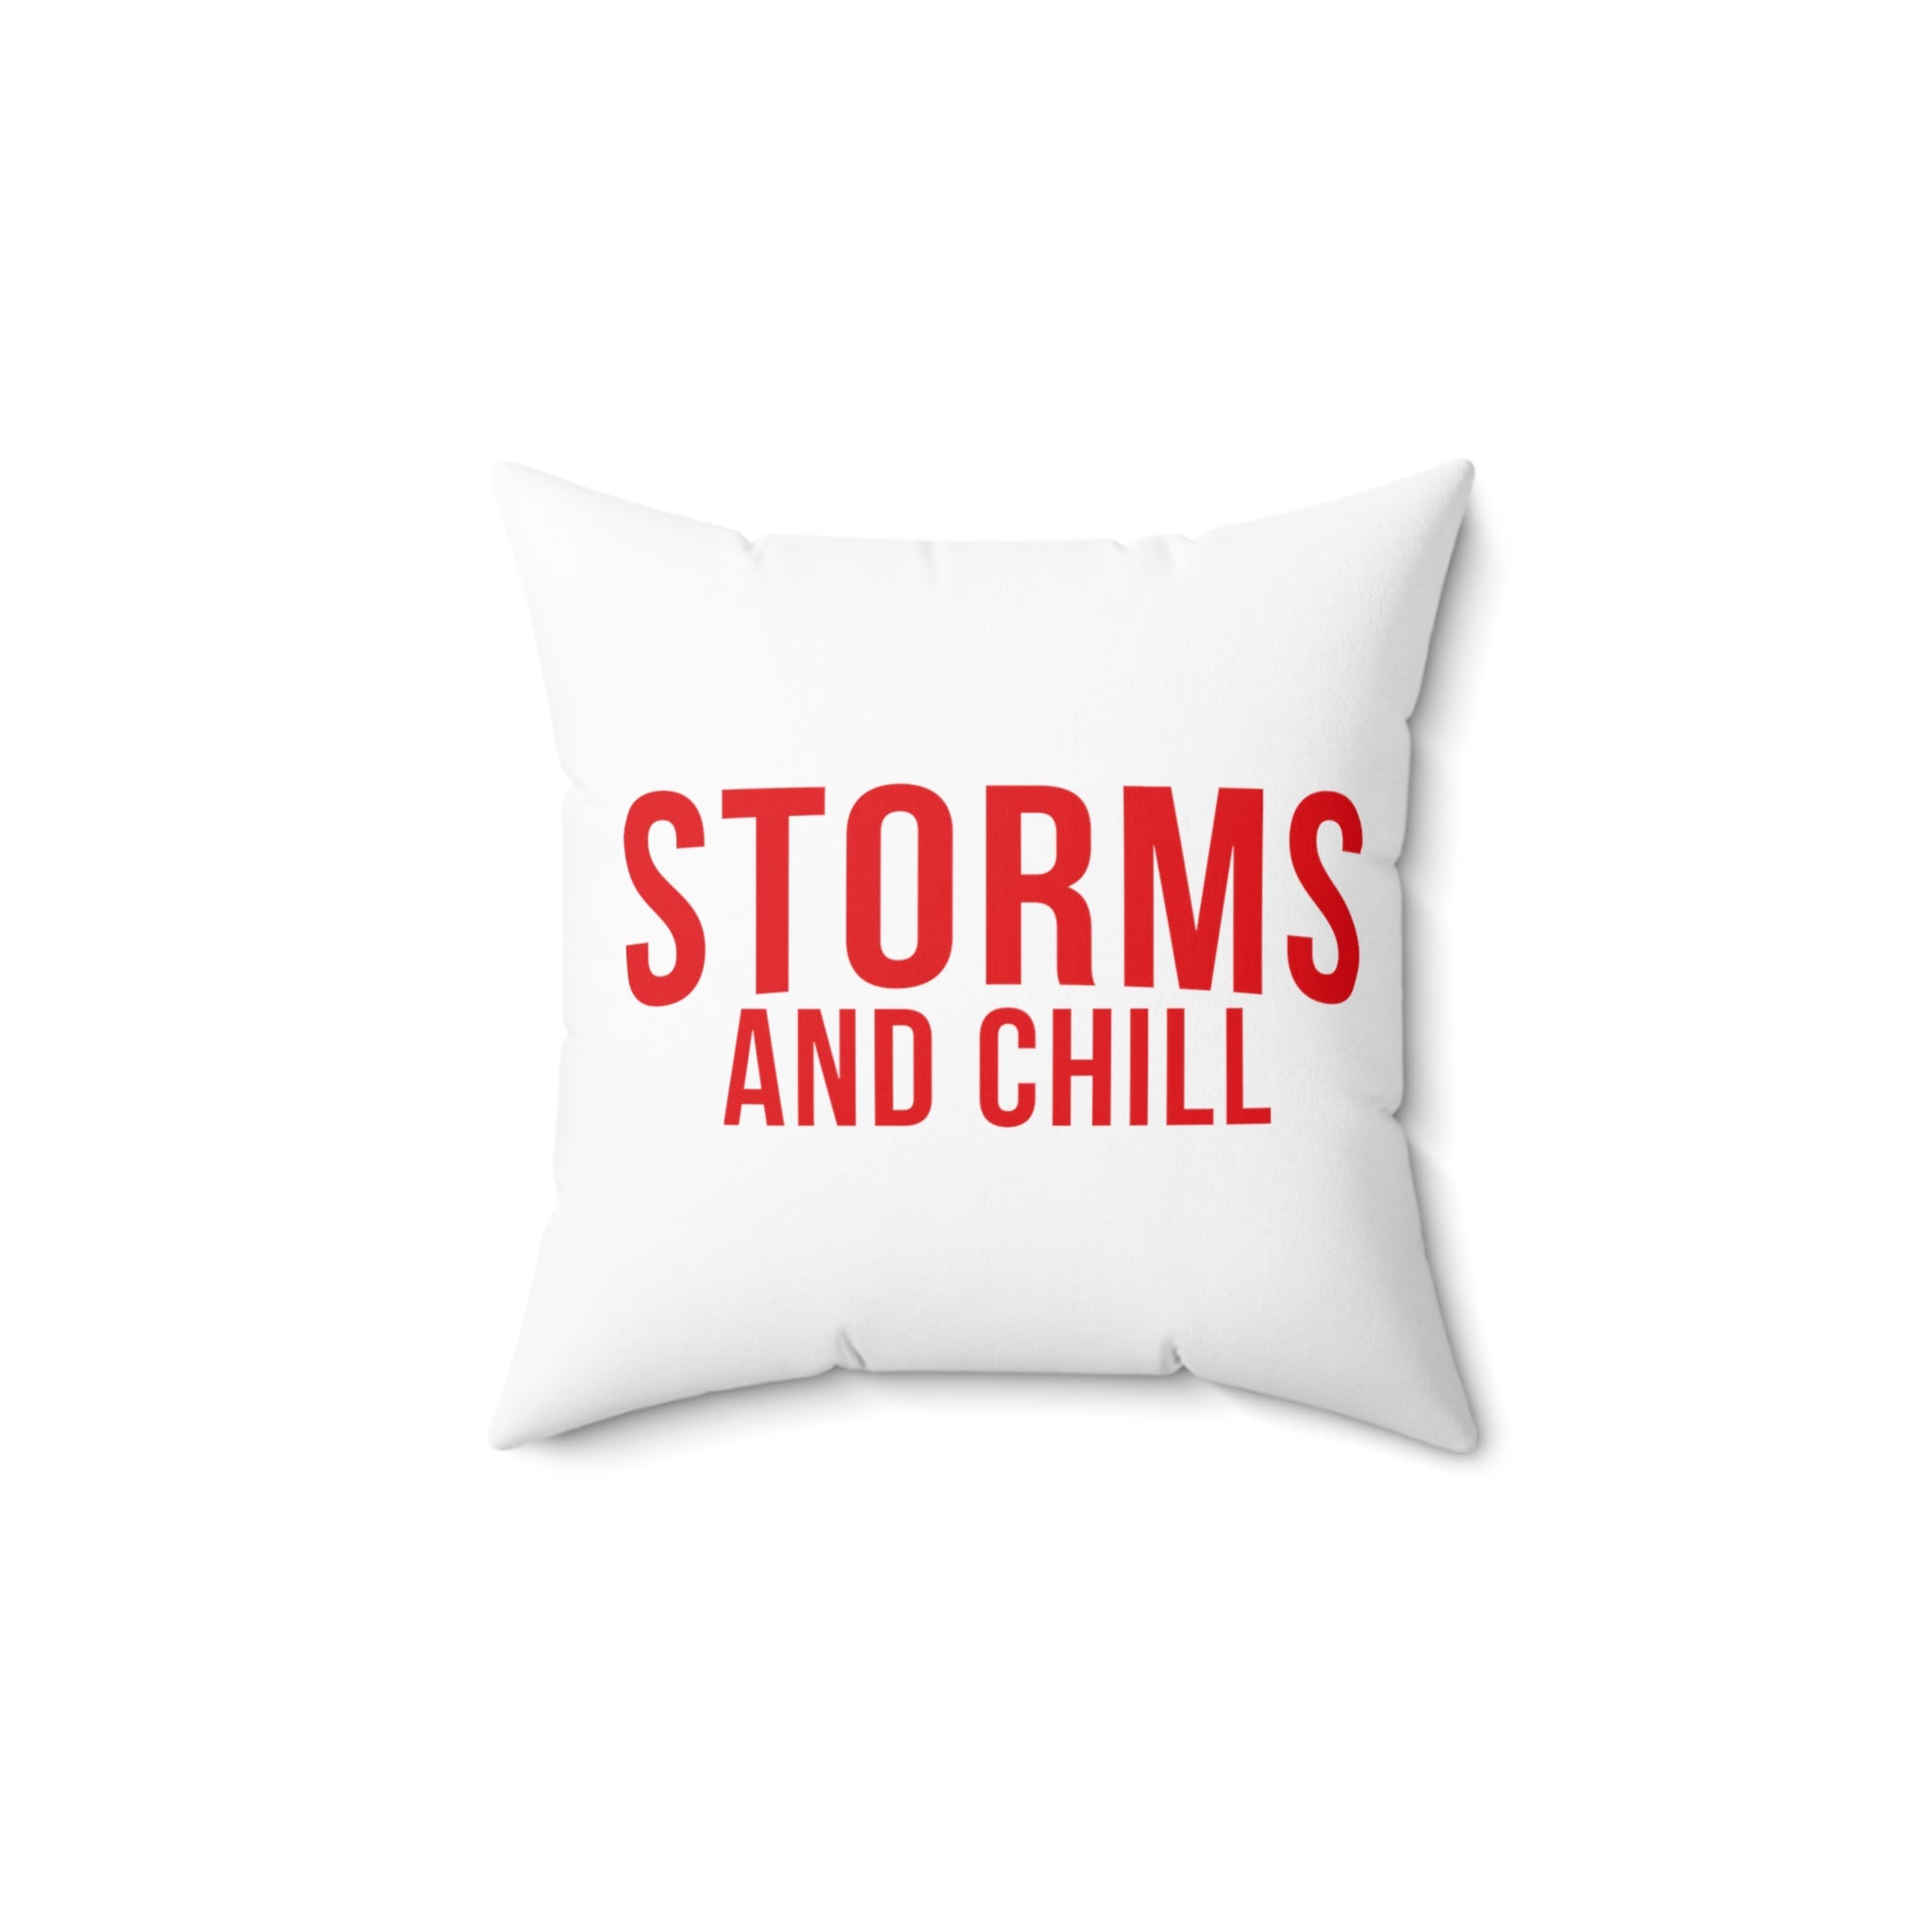 Storms and Chill Throw Pillow 